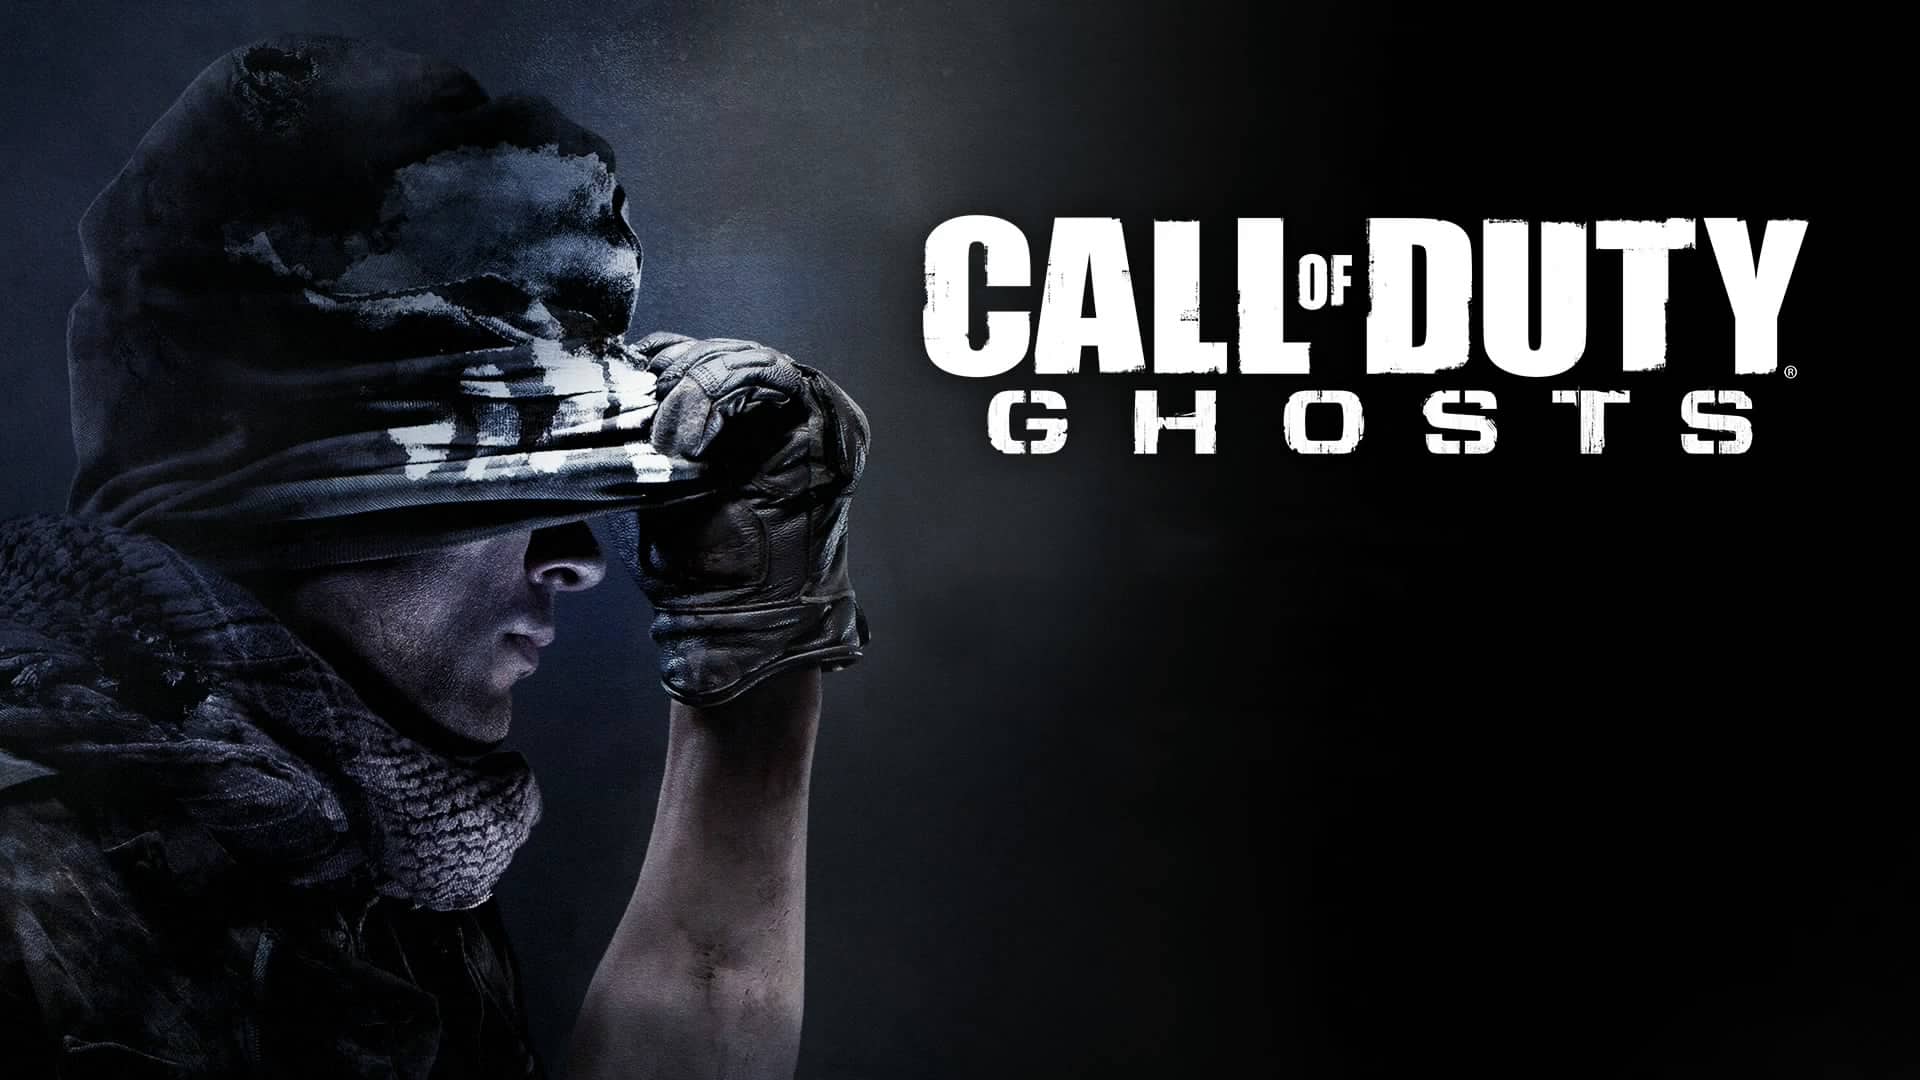 Best Call of Duty Games - Call of Duty Ghosts